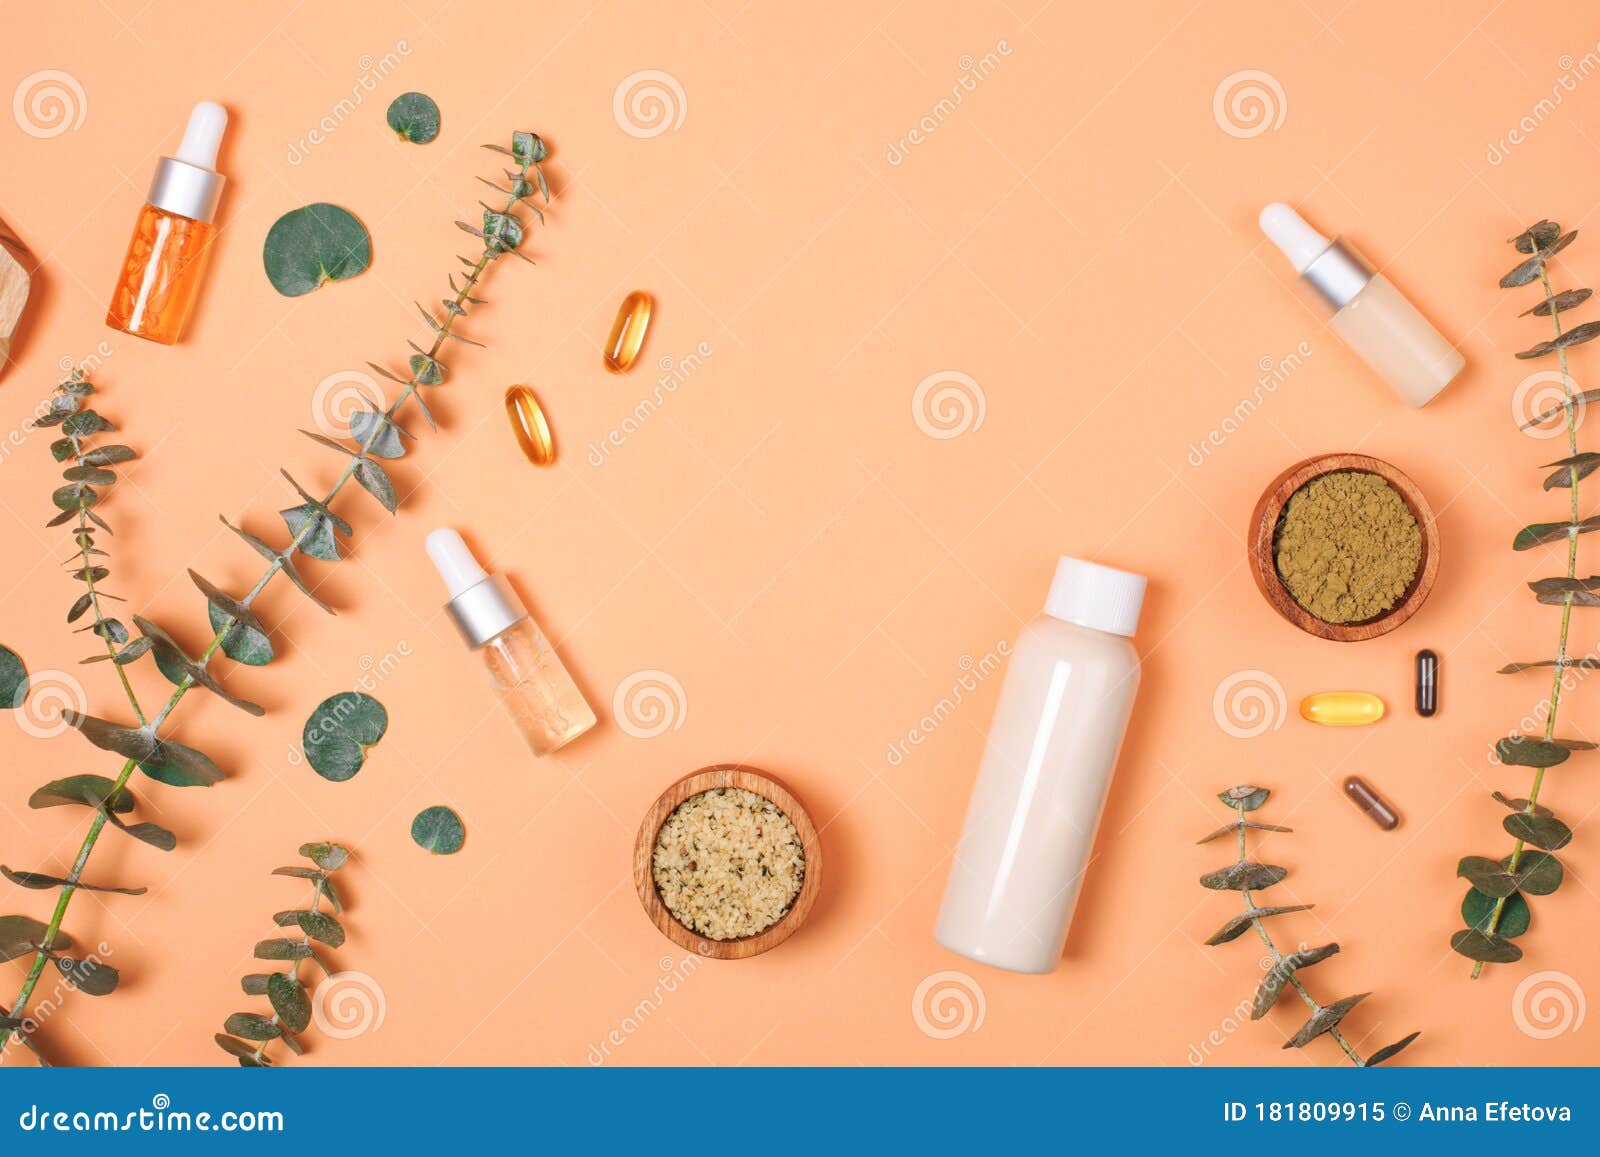 Modern Apothecary Concept Stock Image Image Of Medicine 181809915